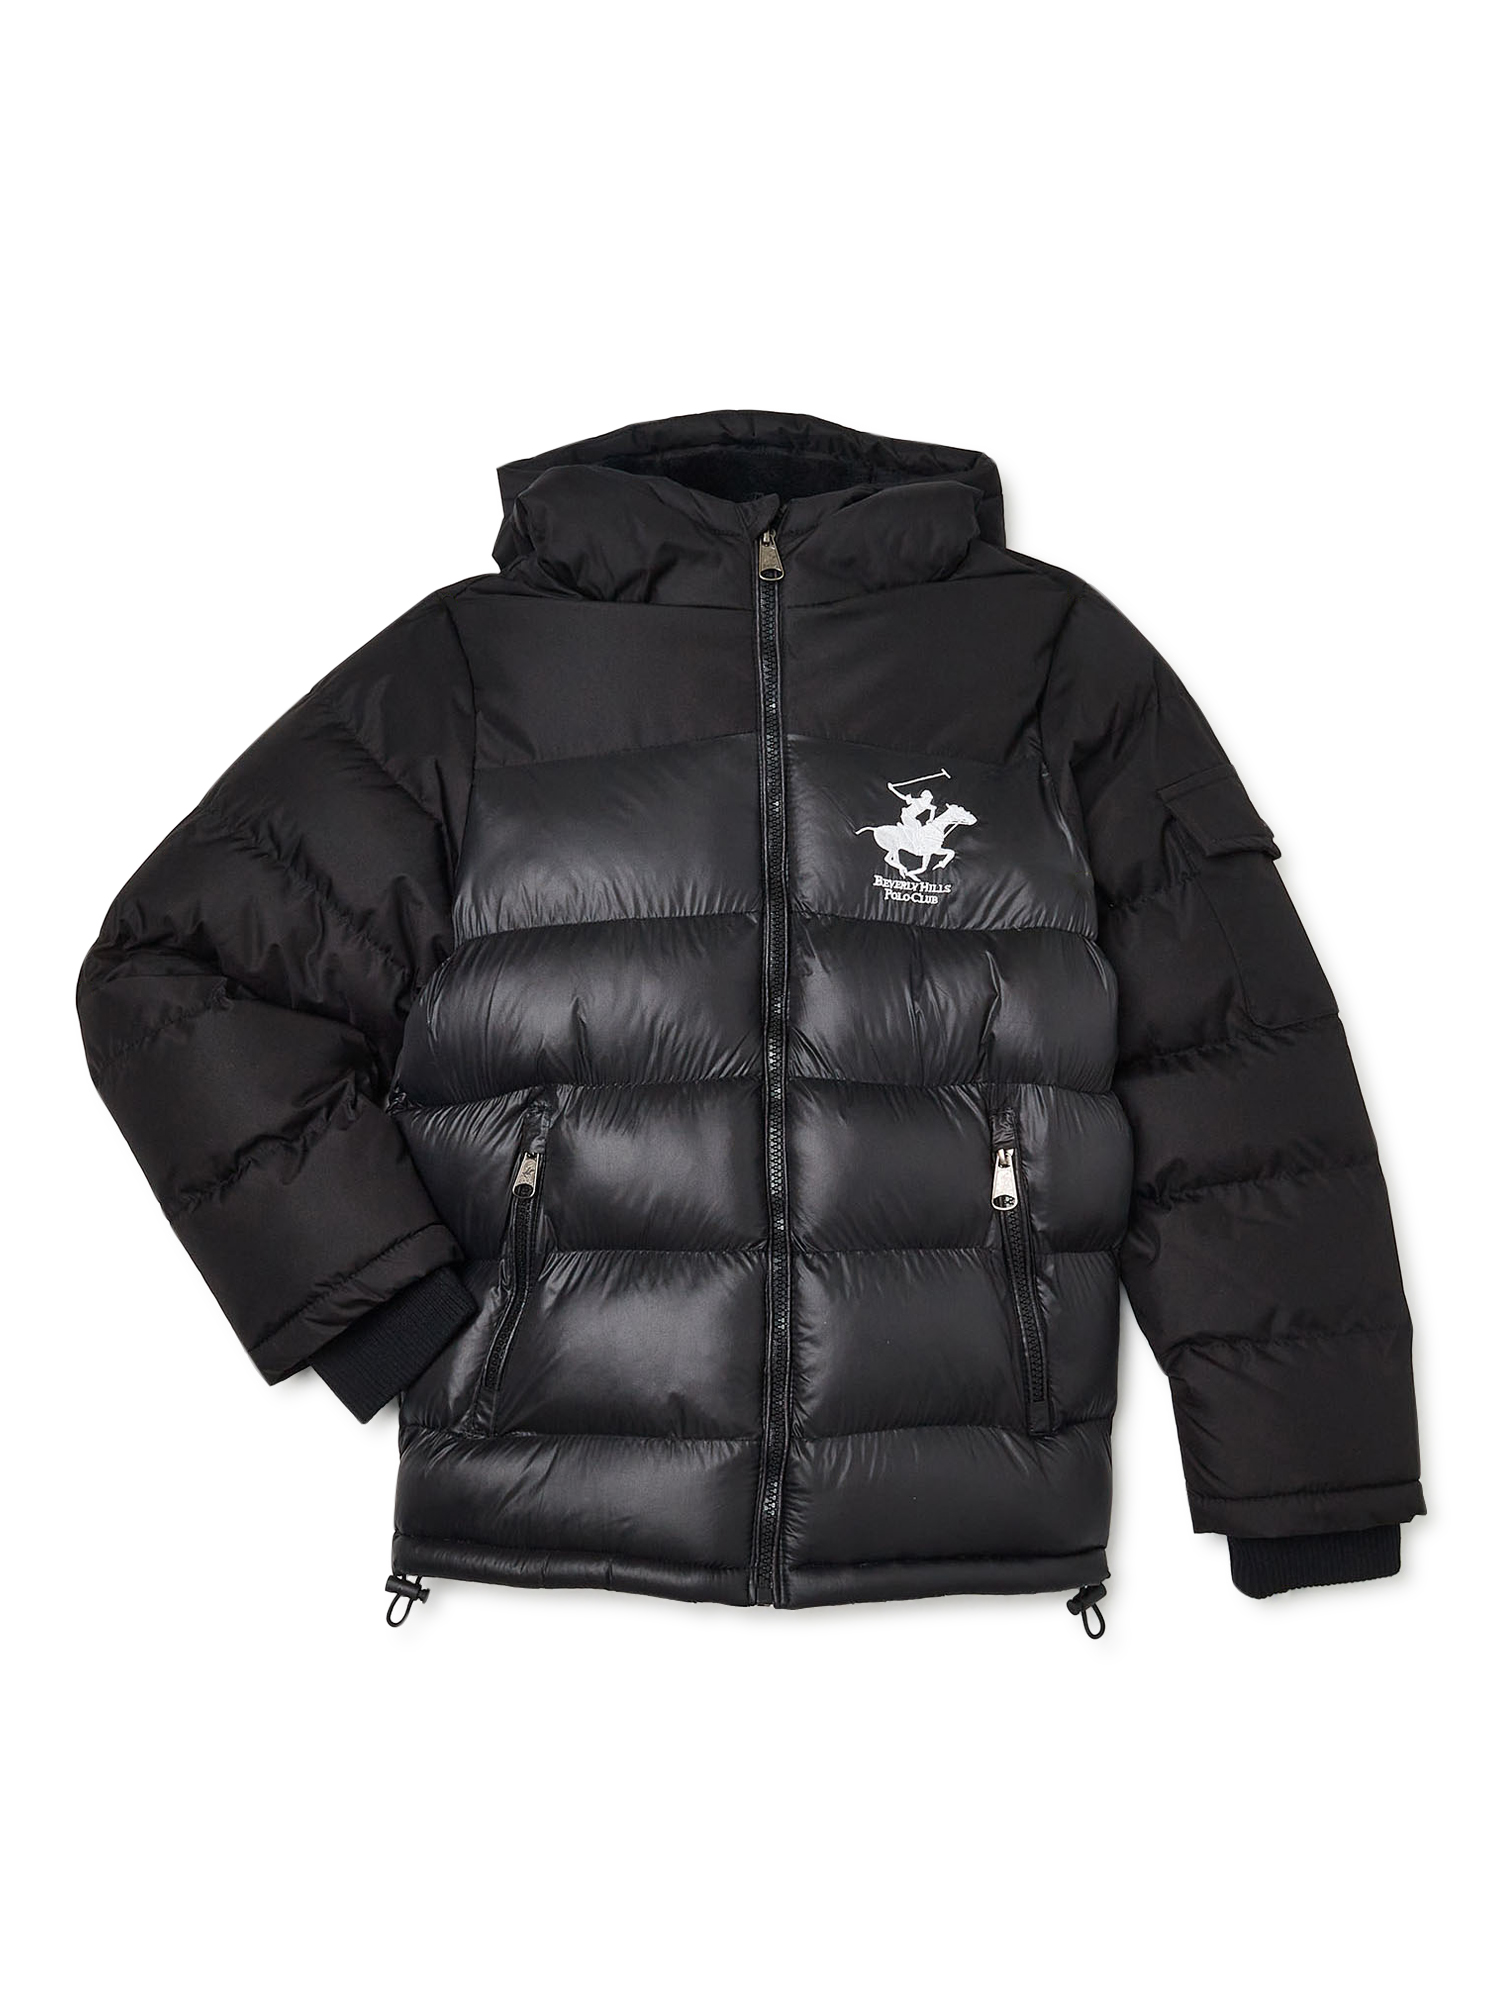 Beverly Hills polo Club Boys Logo Puffer Coat, Sizes 8-20 - image 1 of 3